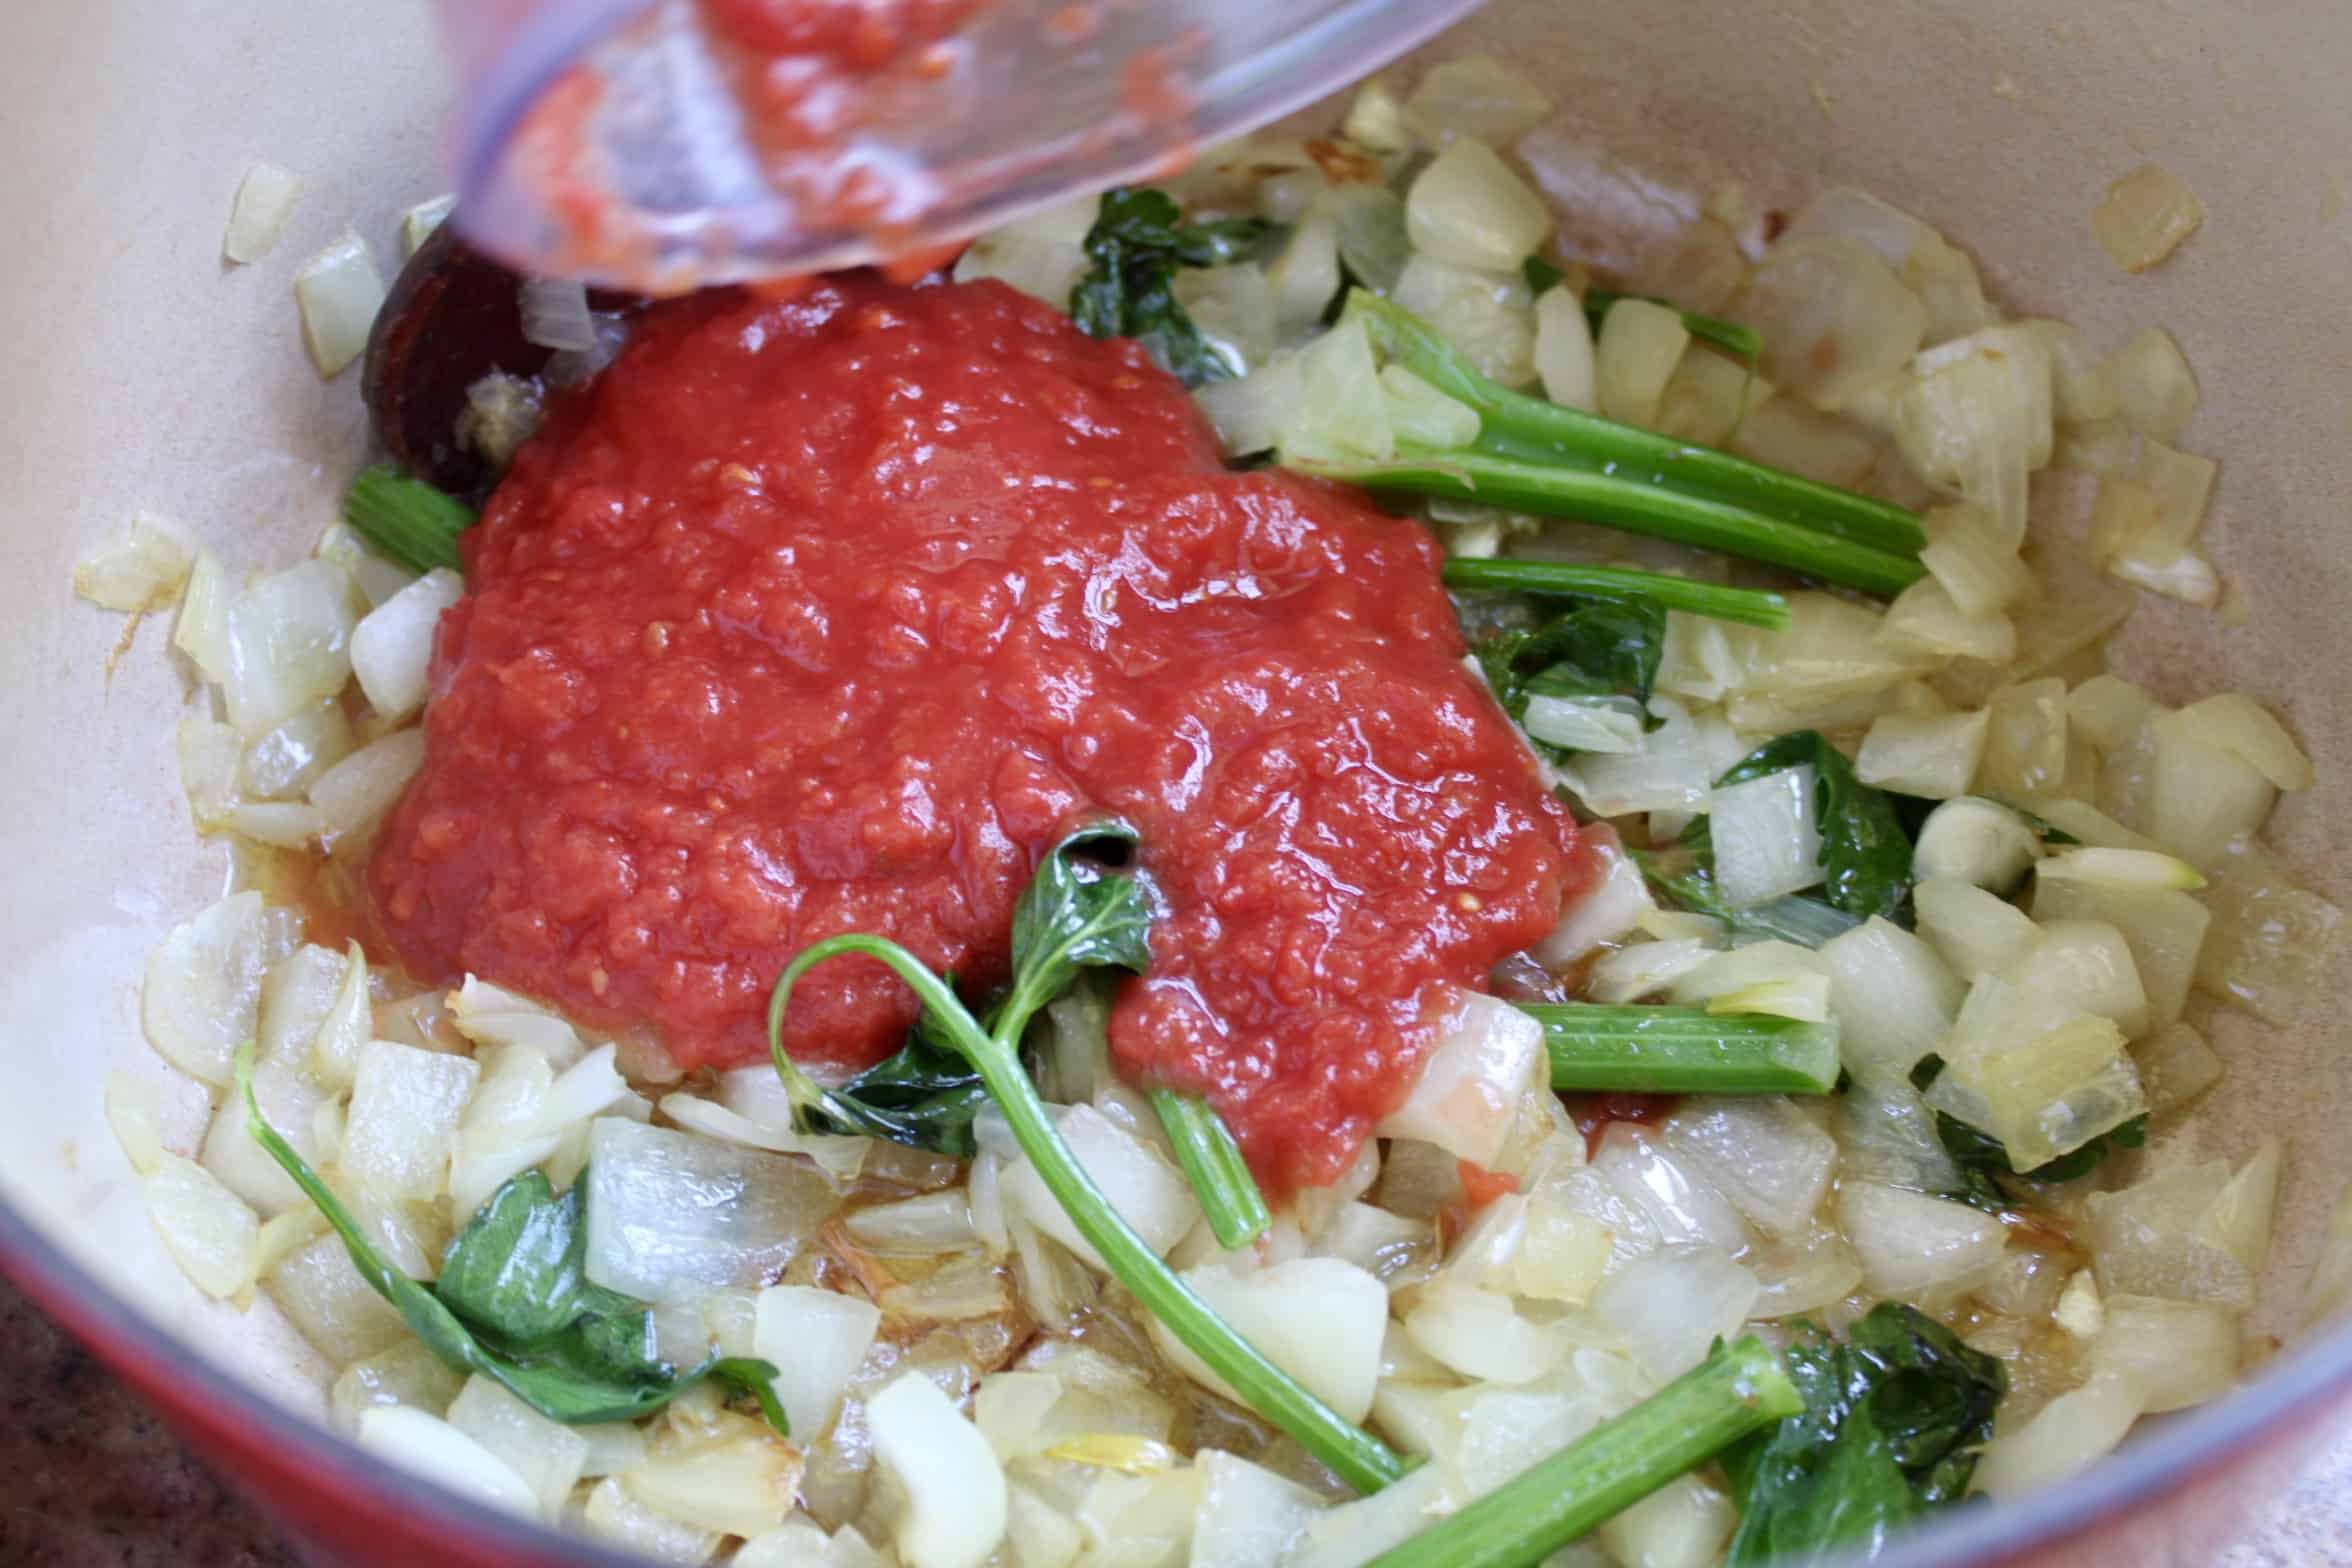 adding tomato puree to onions and celery